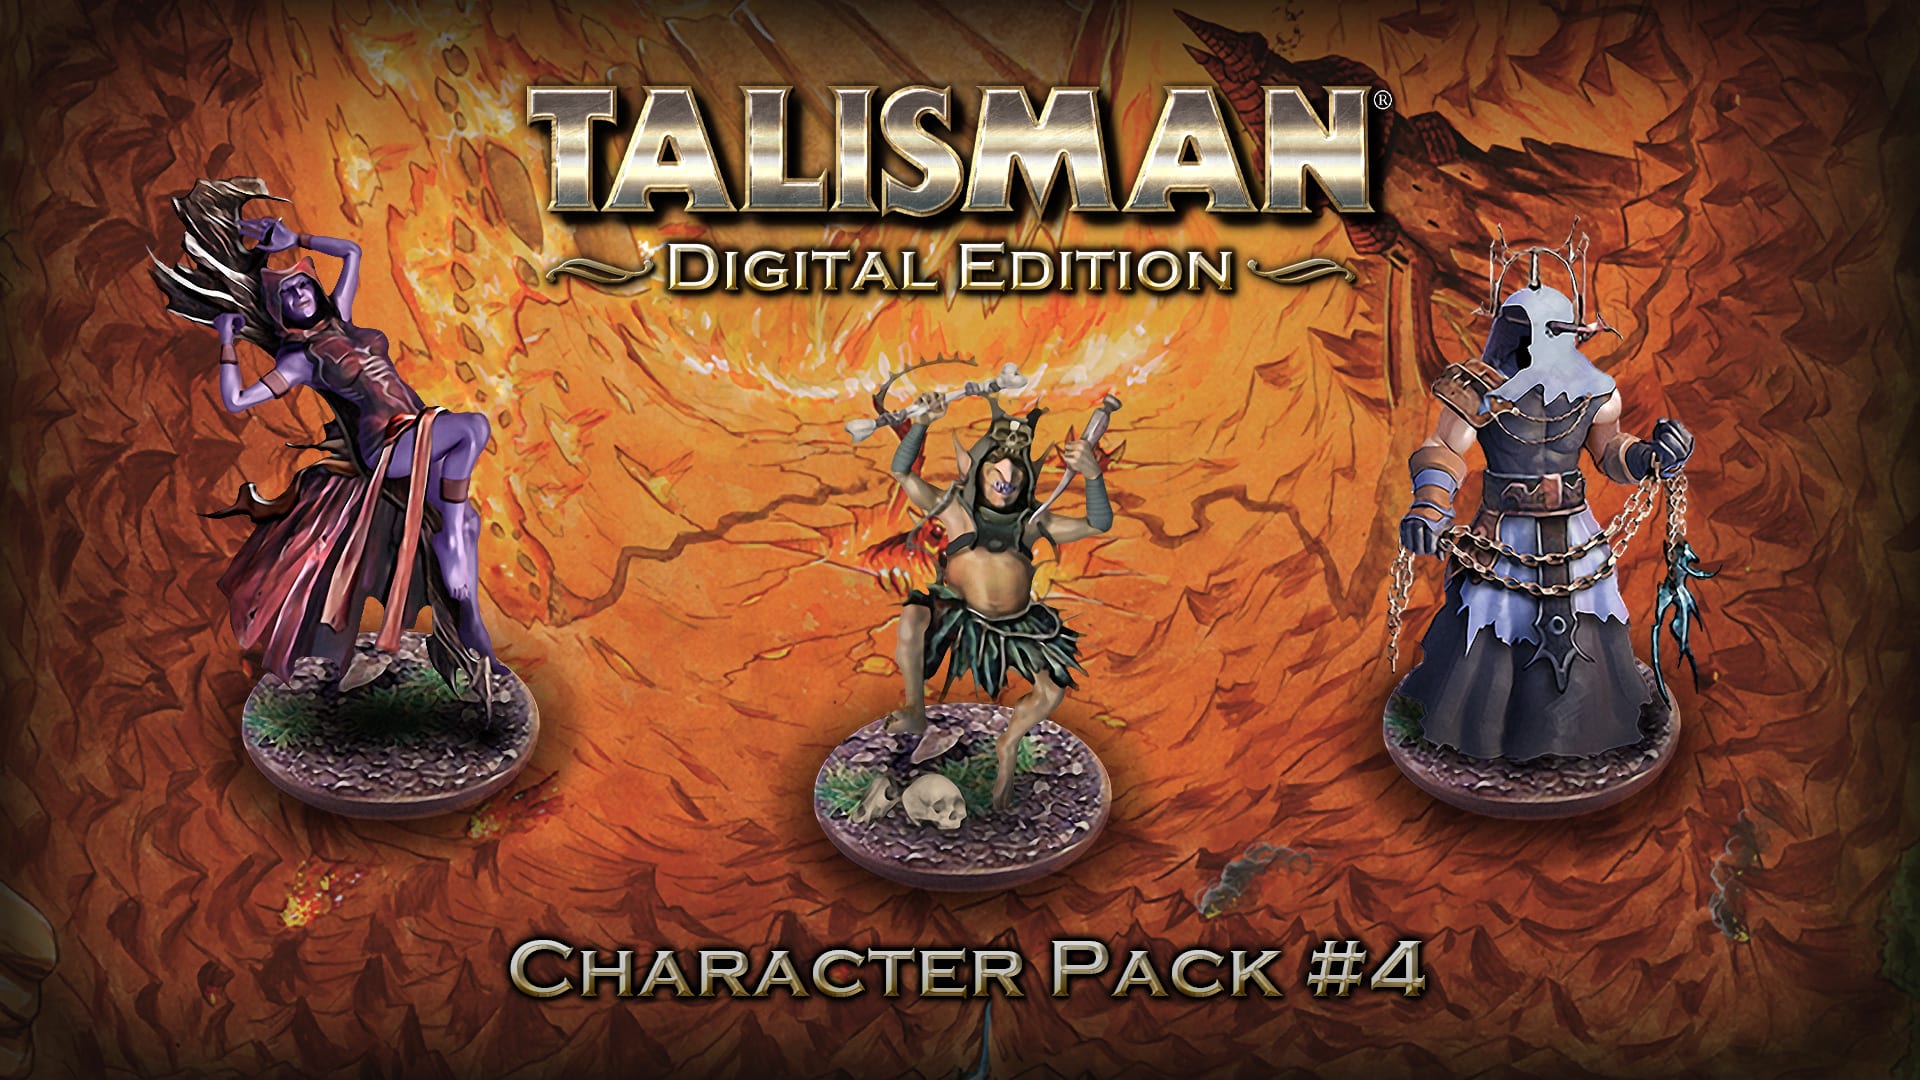 Character Pack #4